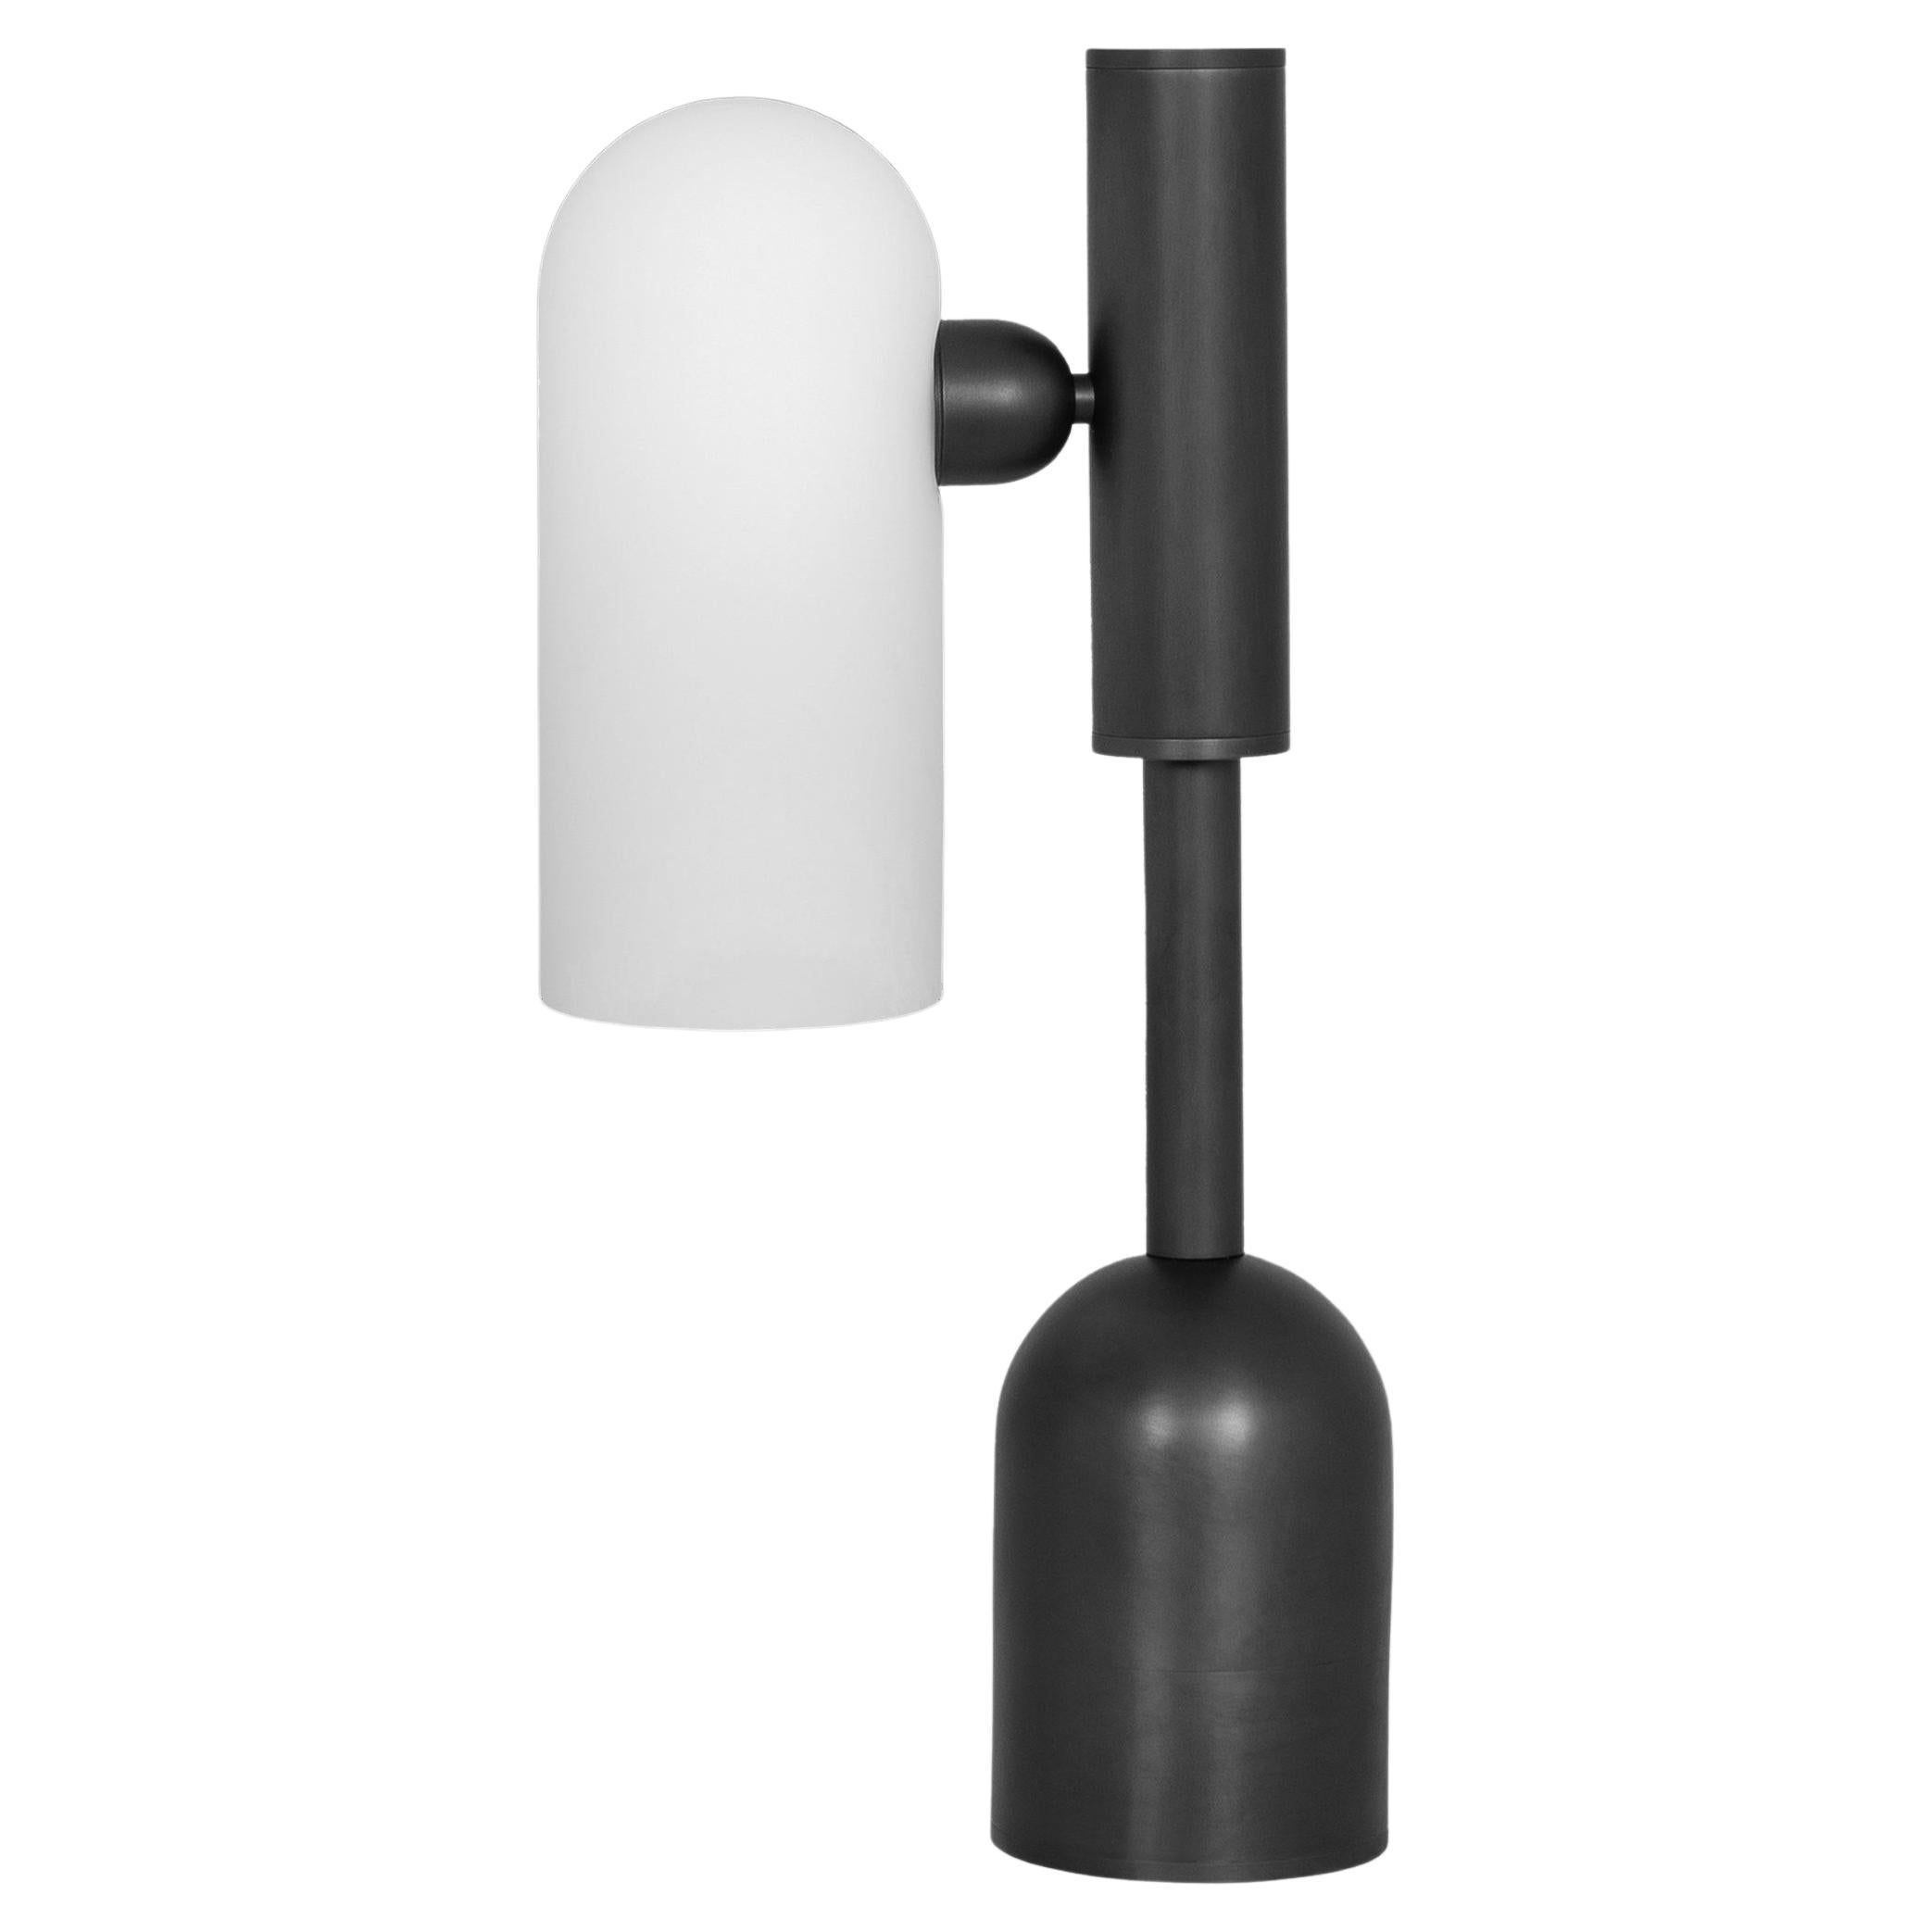 Odyssey 1 Table Lamp